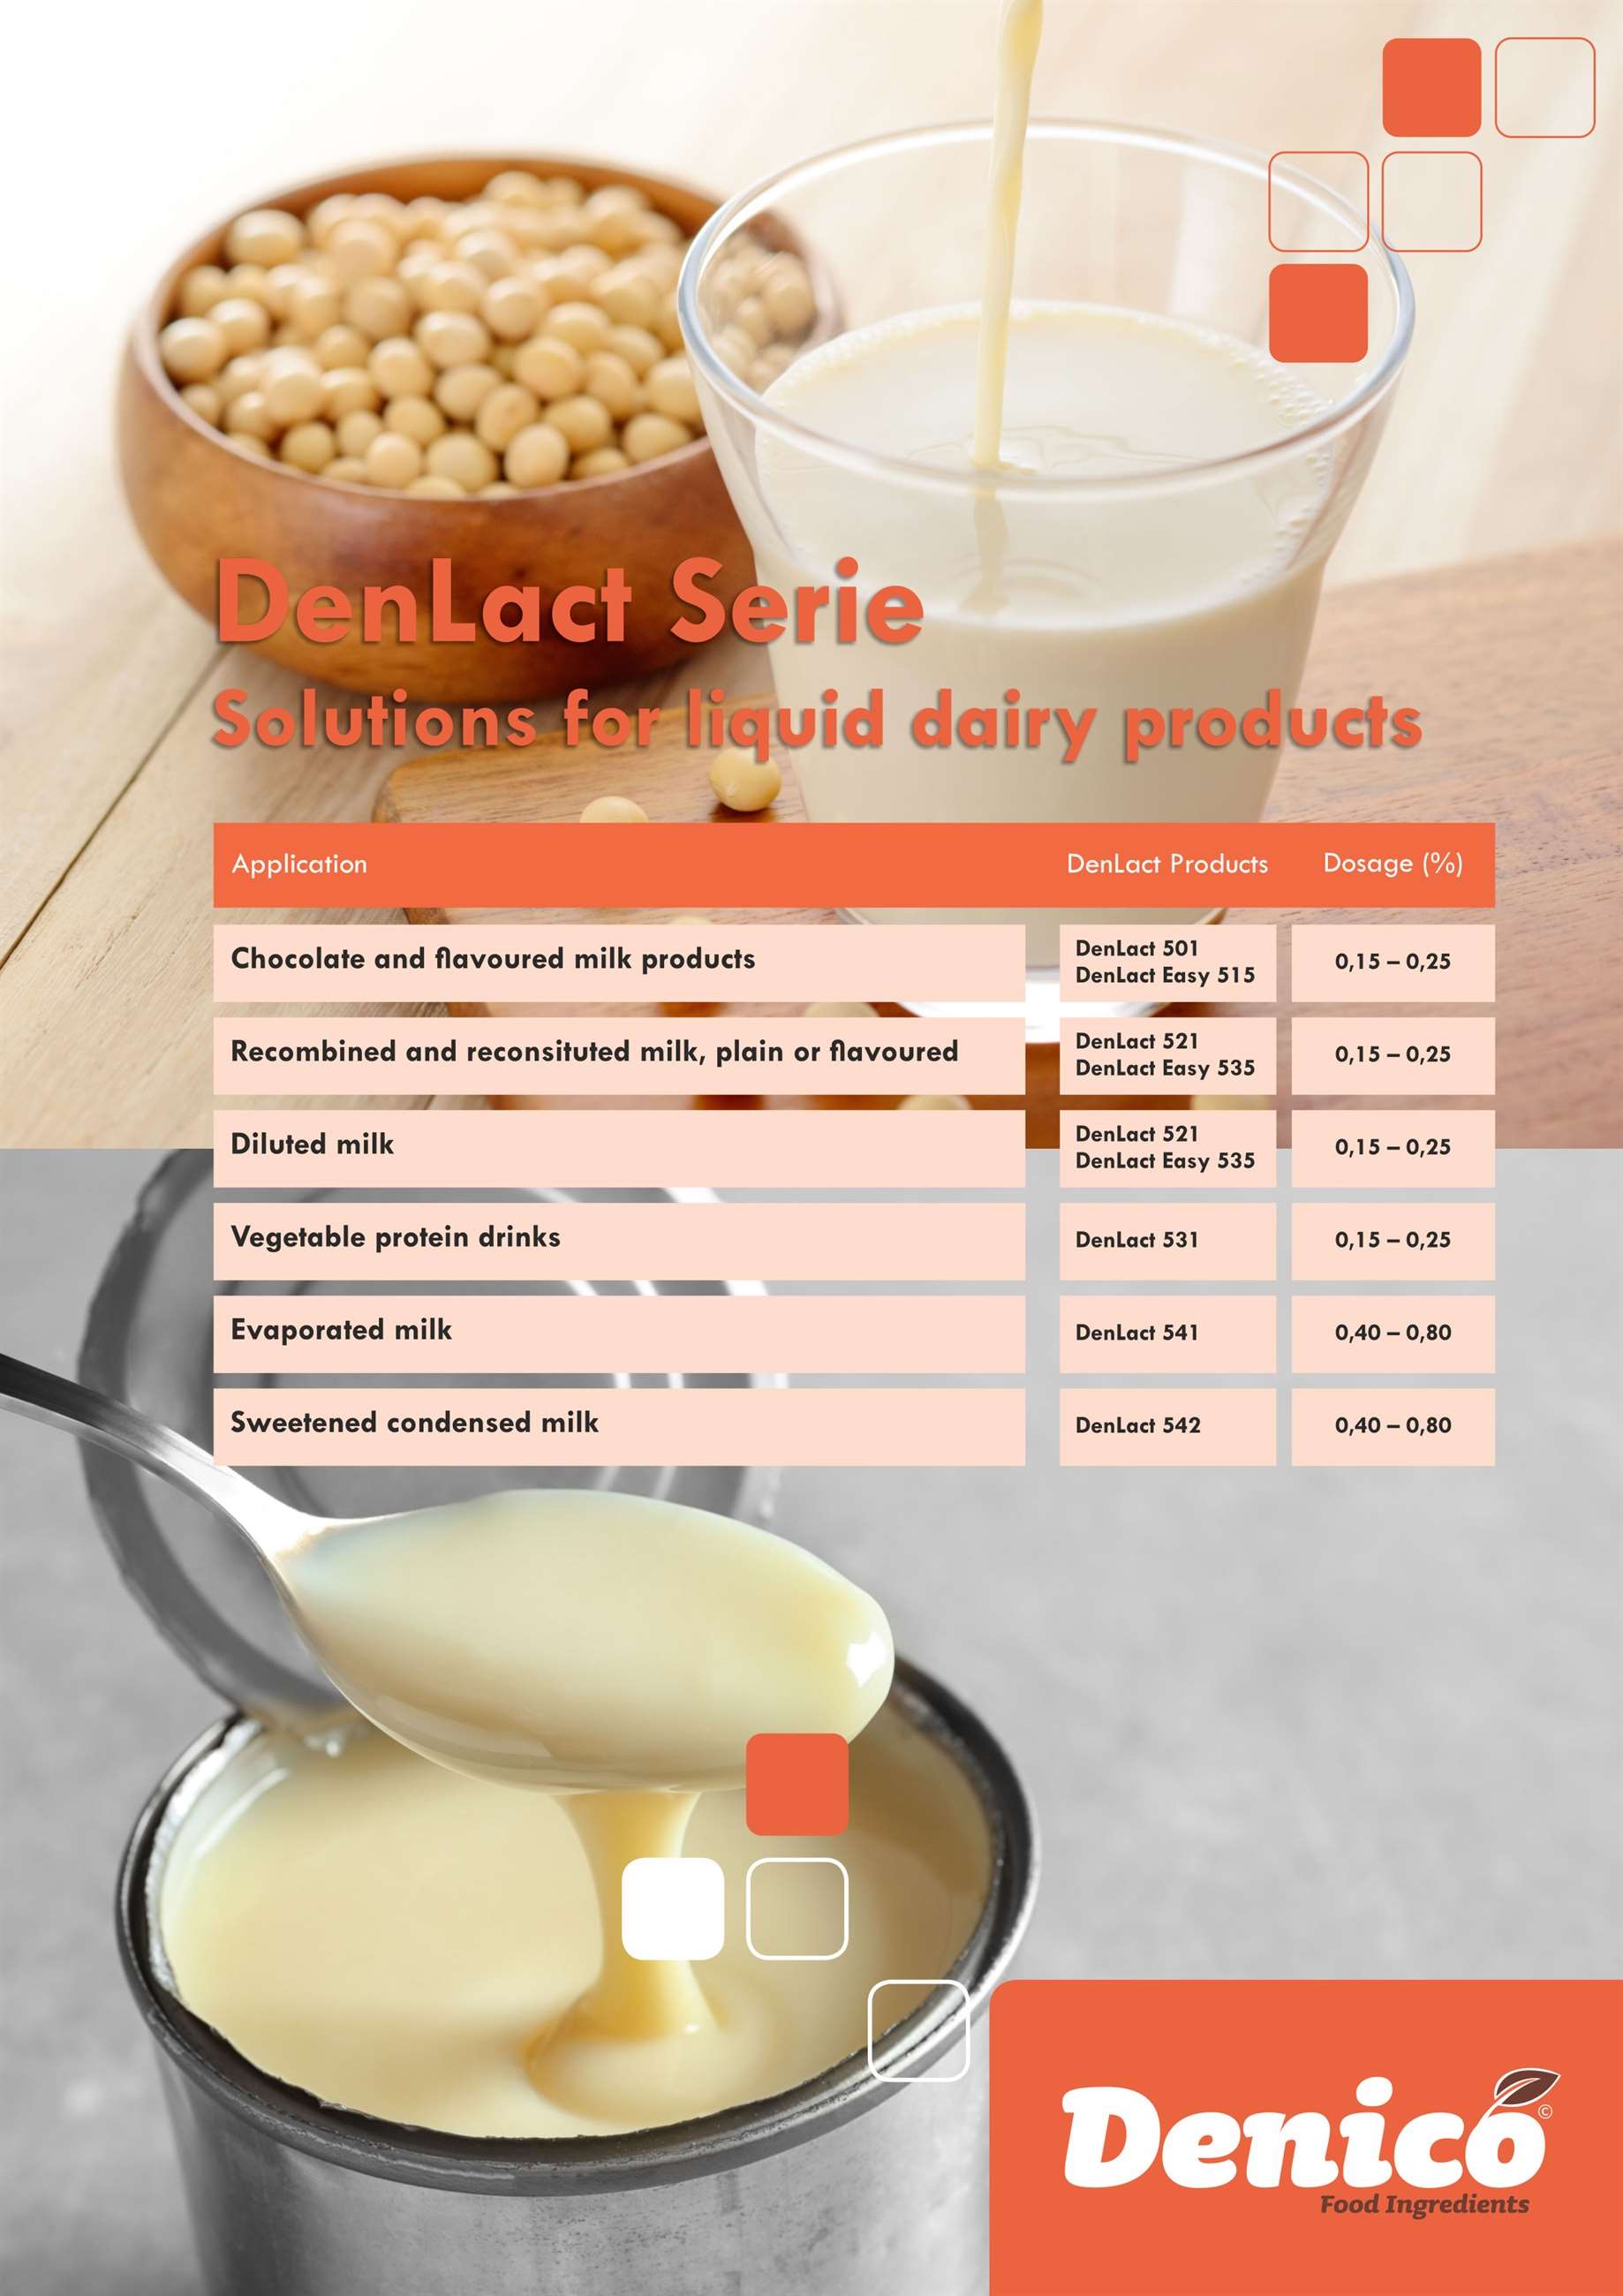 denlact---solutions-for-liquid-dairy-products-ver01-1